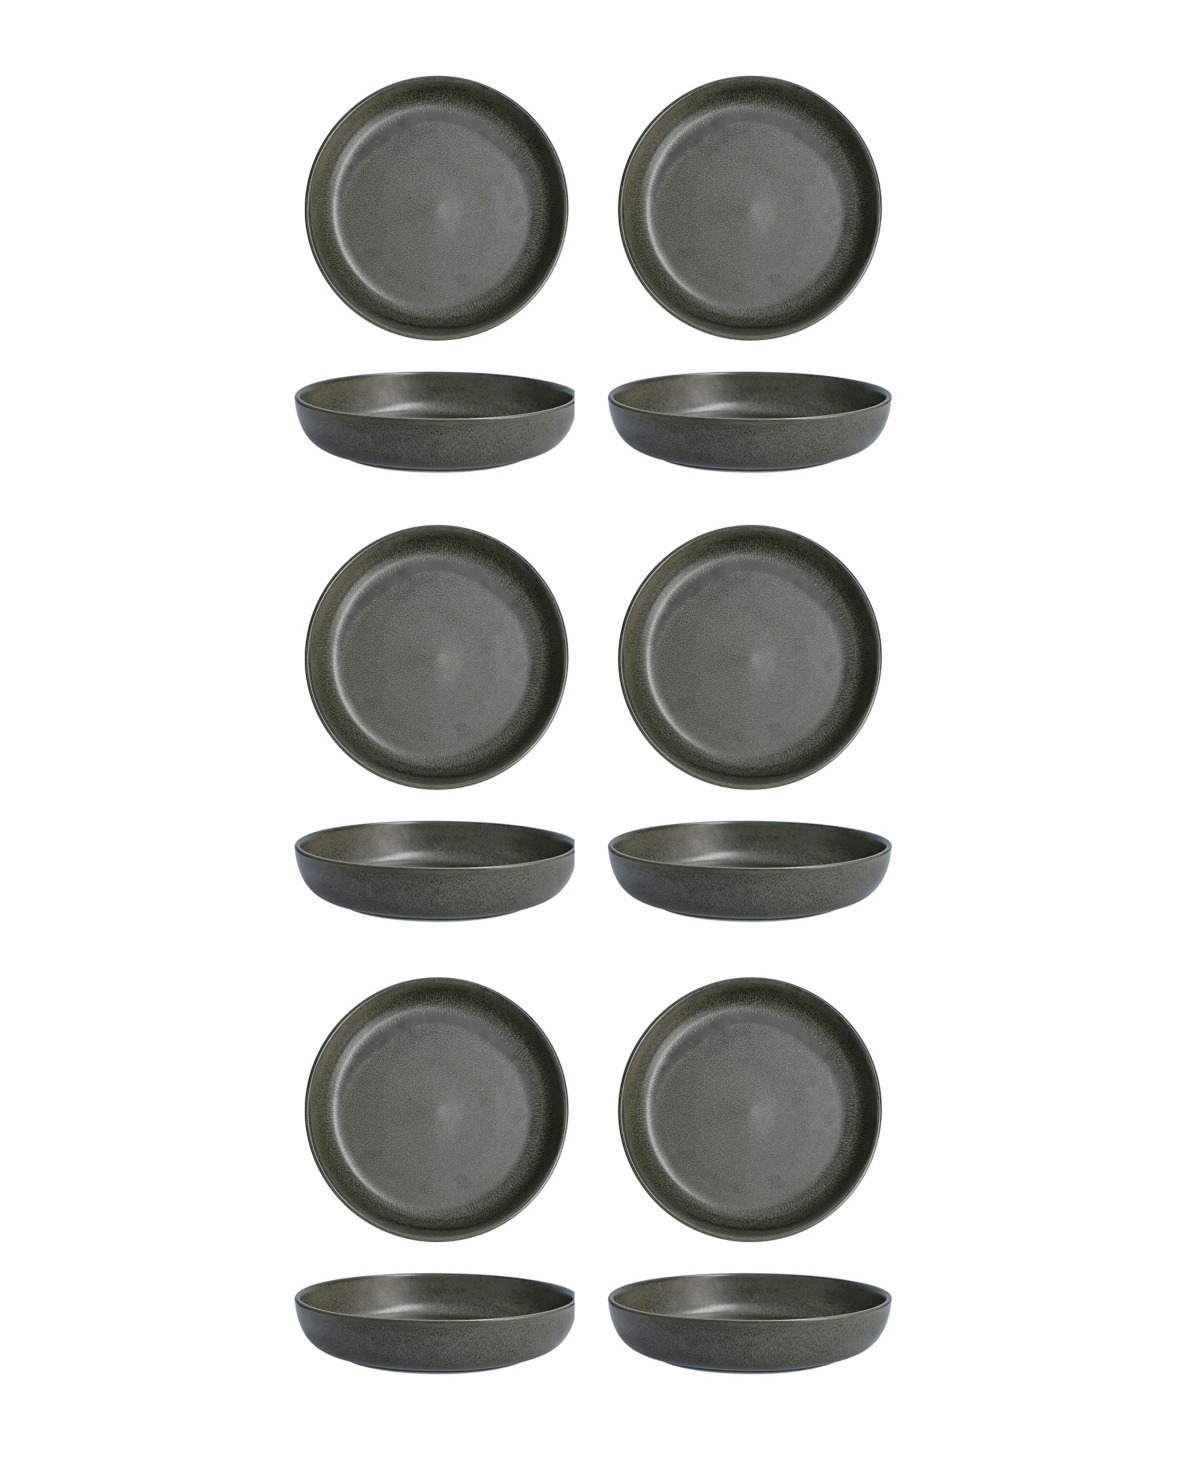 Sound Forest Coupe 8.5" 6 Piece Pasta Bowls Set, Service for 6 - Forest